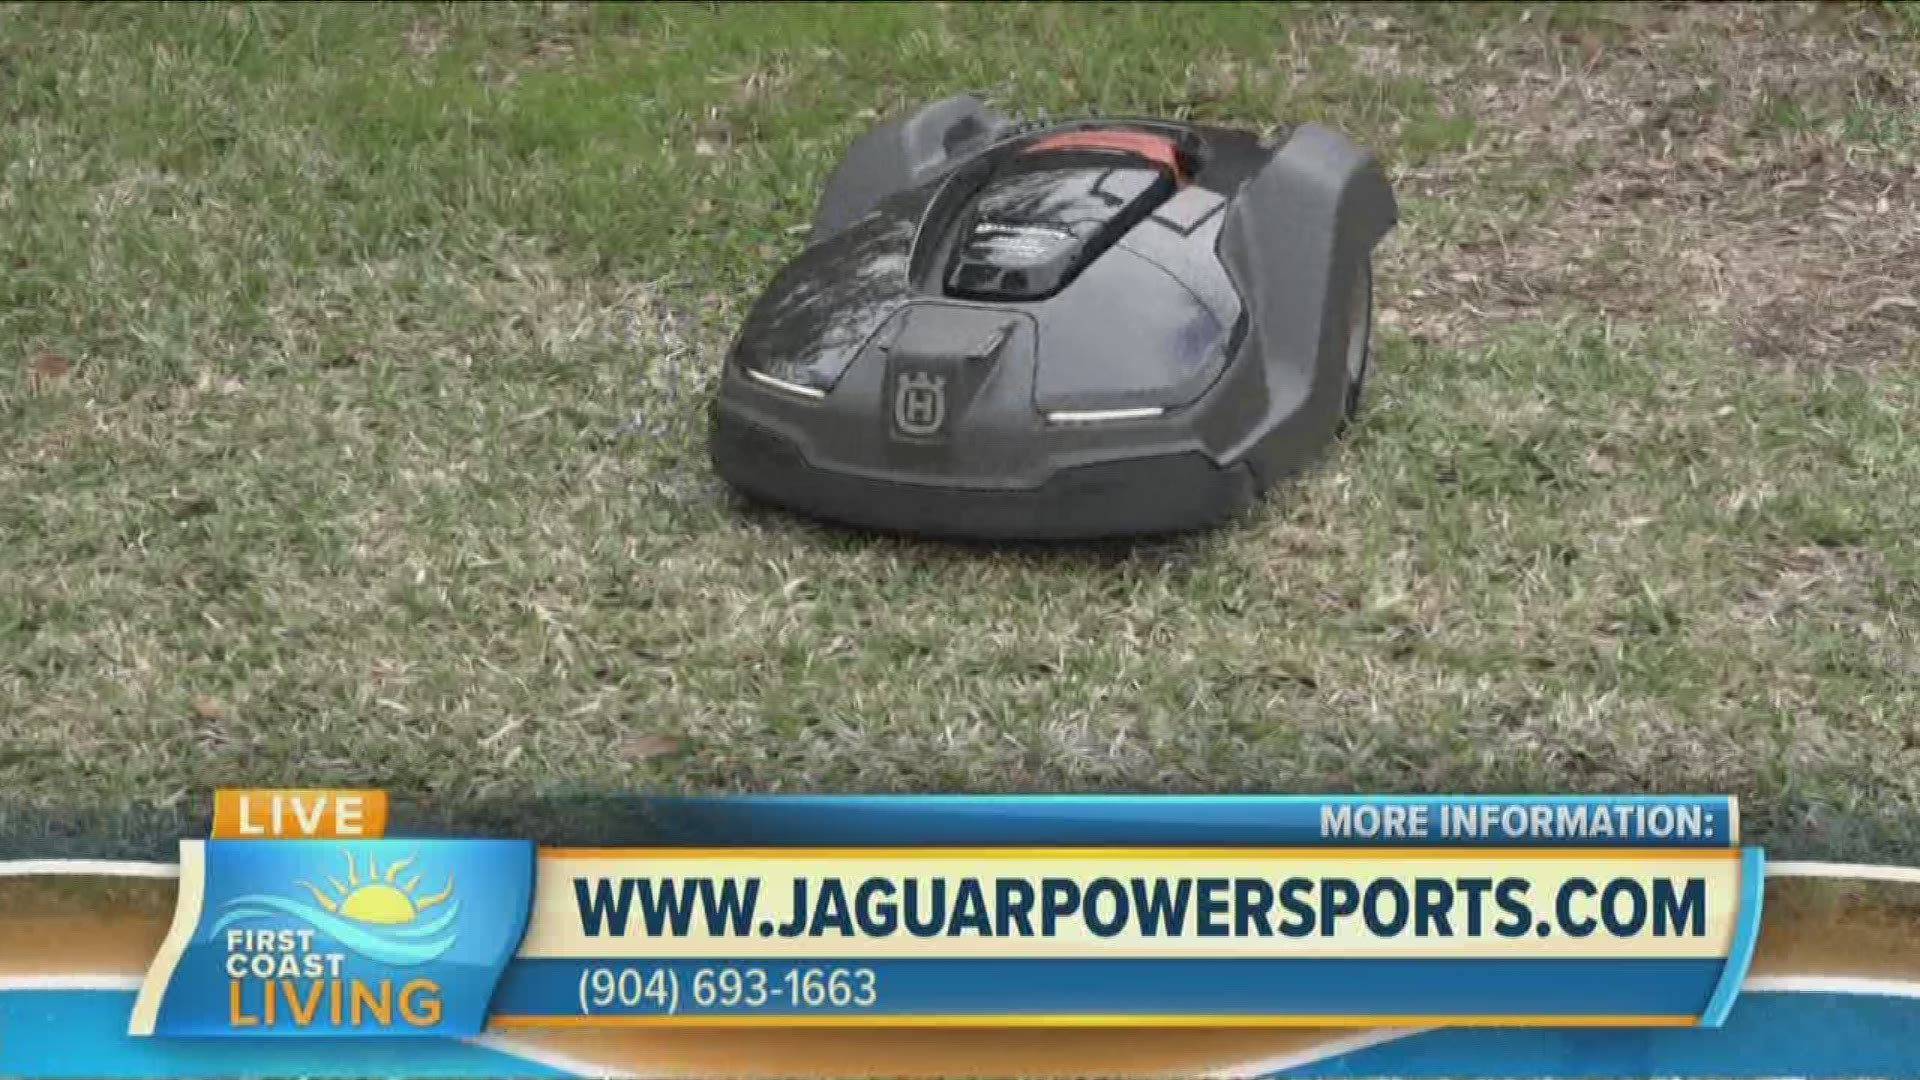 This is the lawn mower of the future!